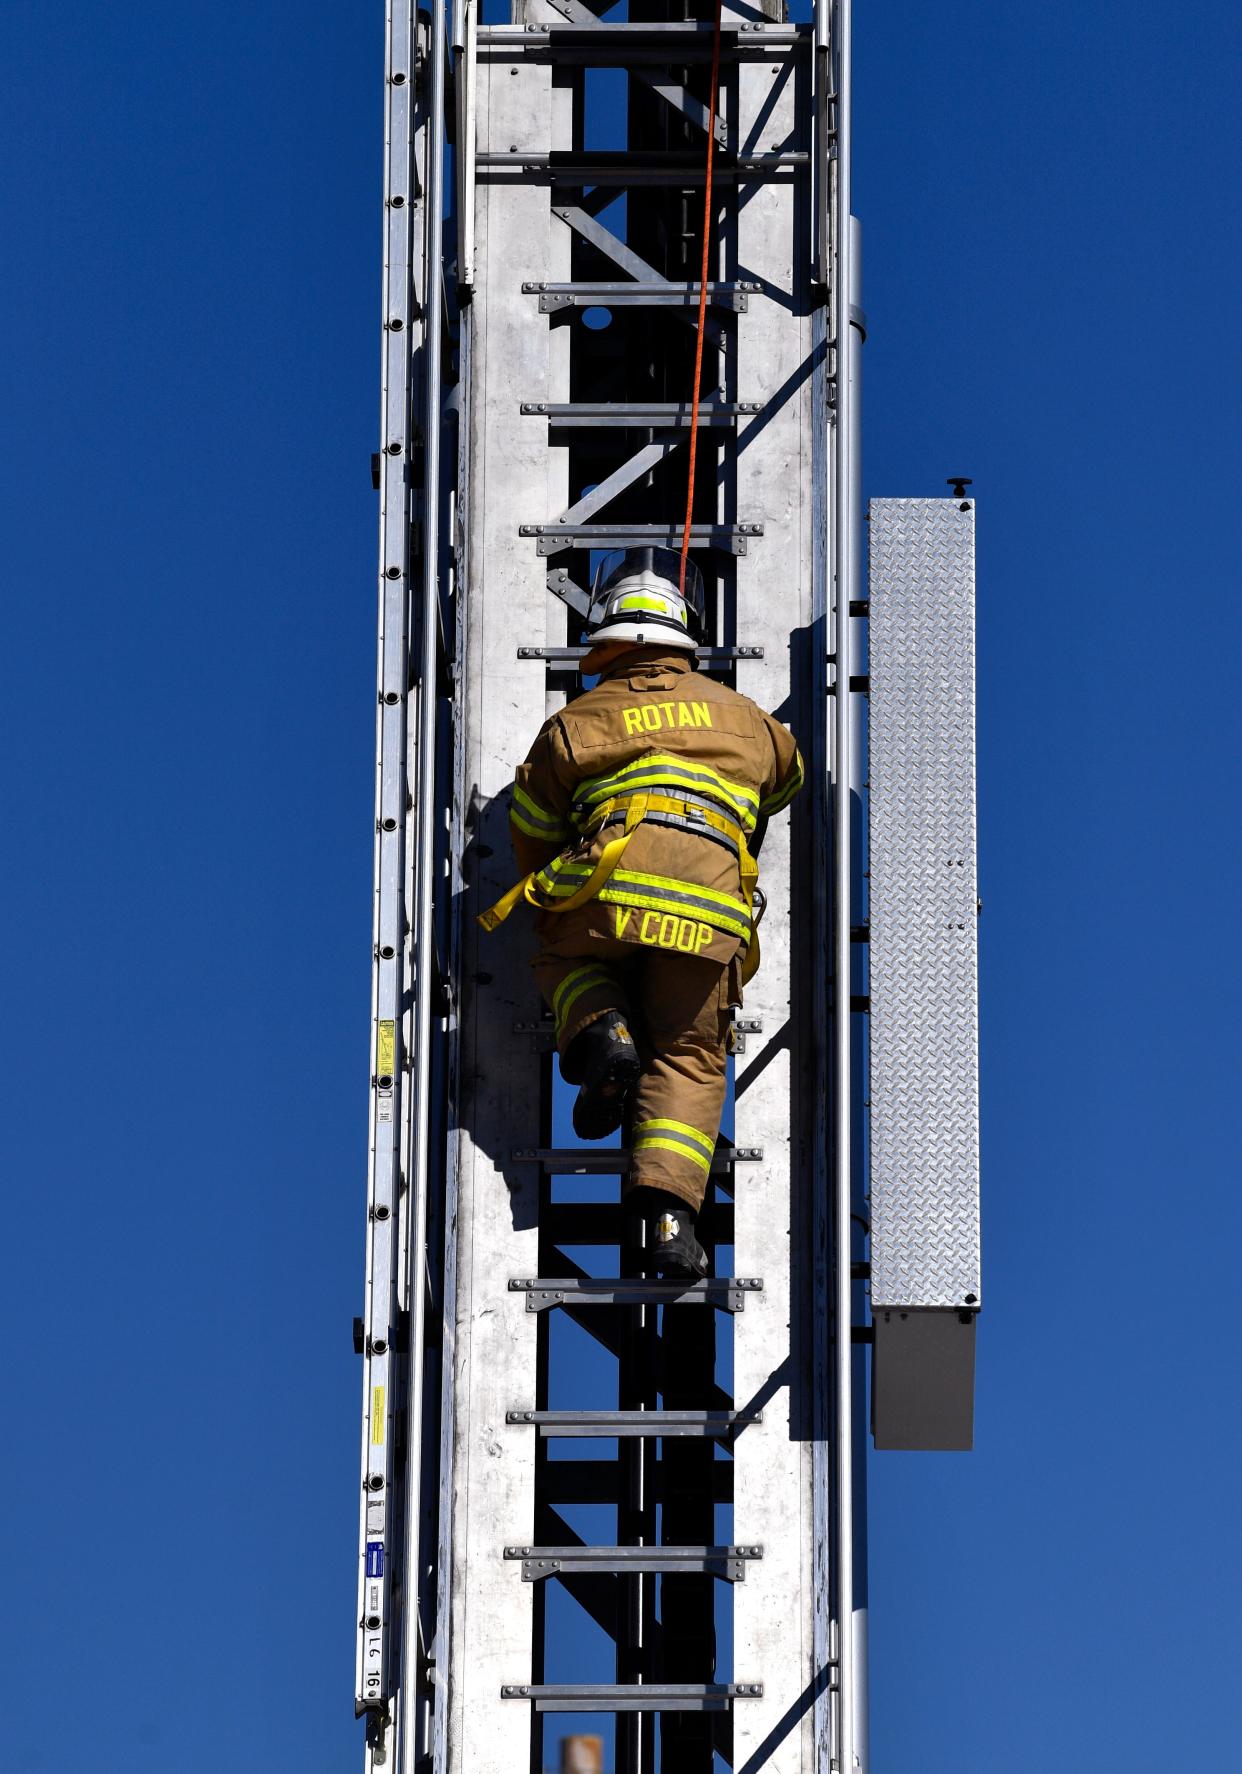 Rotan firefighter Vern Coop climbs 100 feet on an Abilene Fire Department ladder truck wearing his turnout gear at the department's training facility.